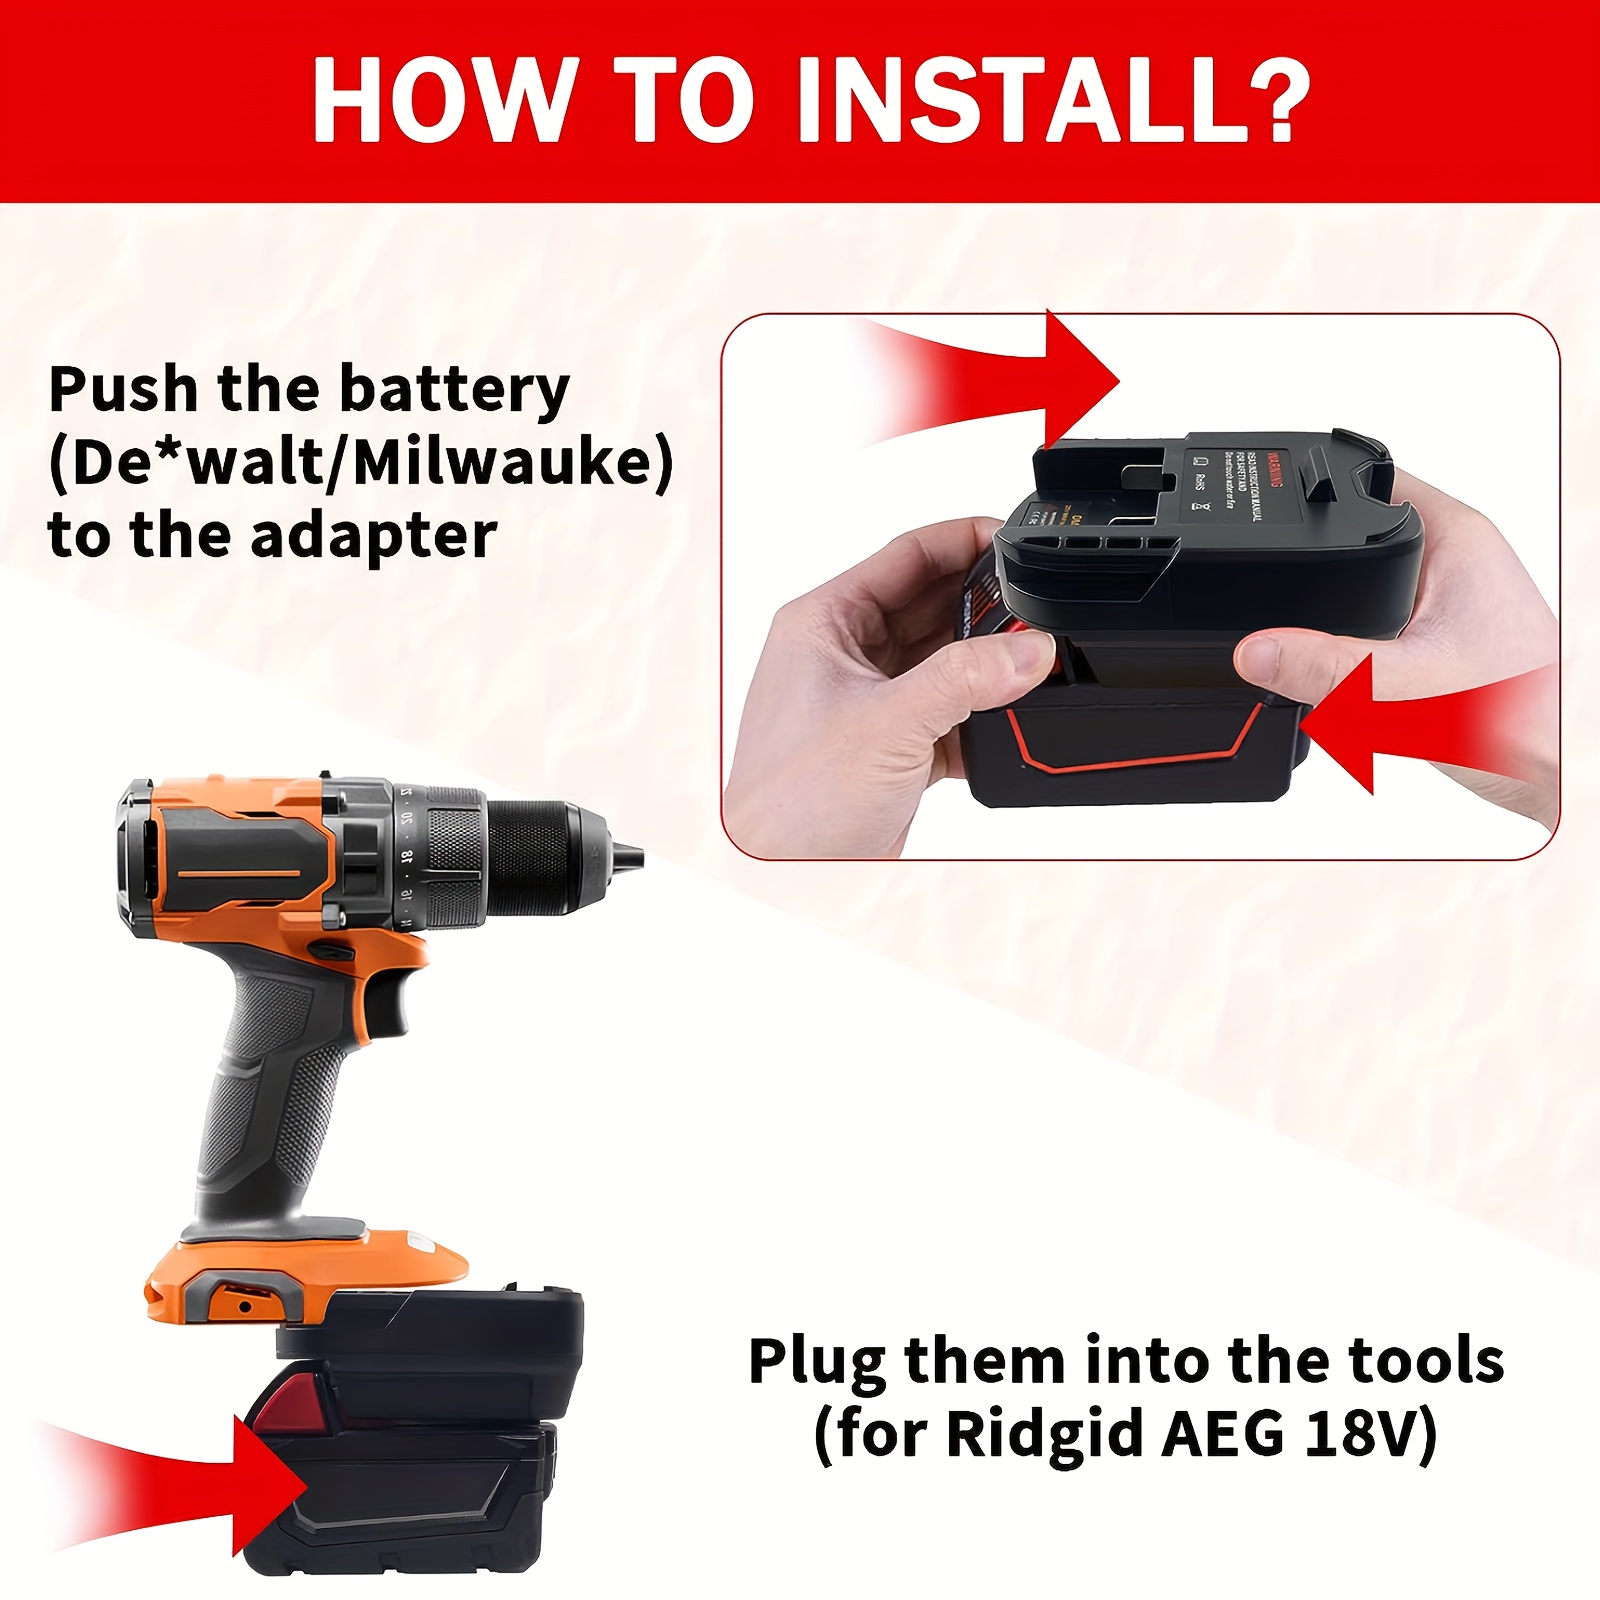 Convert a black & decker cordless drill battery to lithium ion